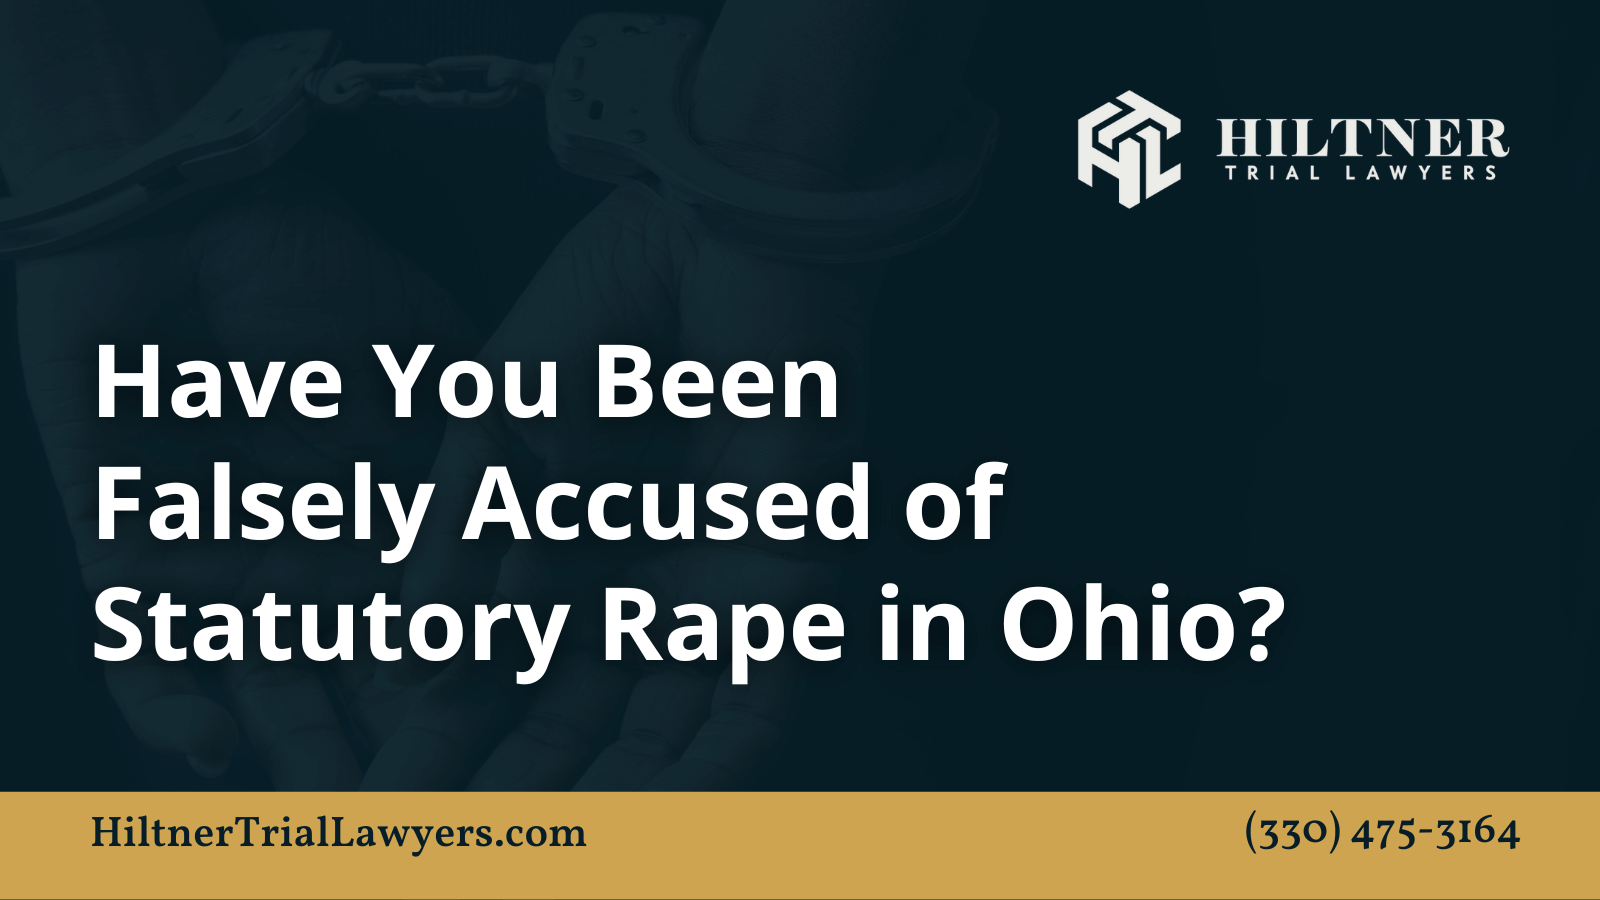 Have You Been Falsely Accused of Statutory Rape in Ohio - Hiltner Trial Lawyers Ohio - max hiltner